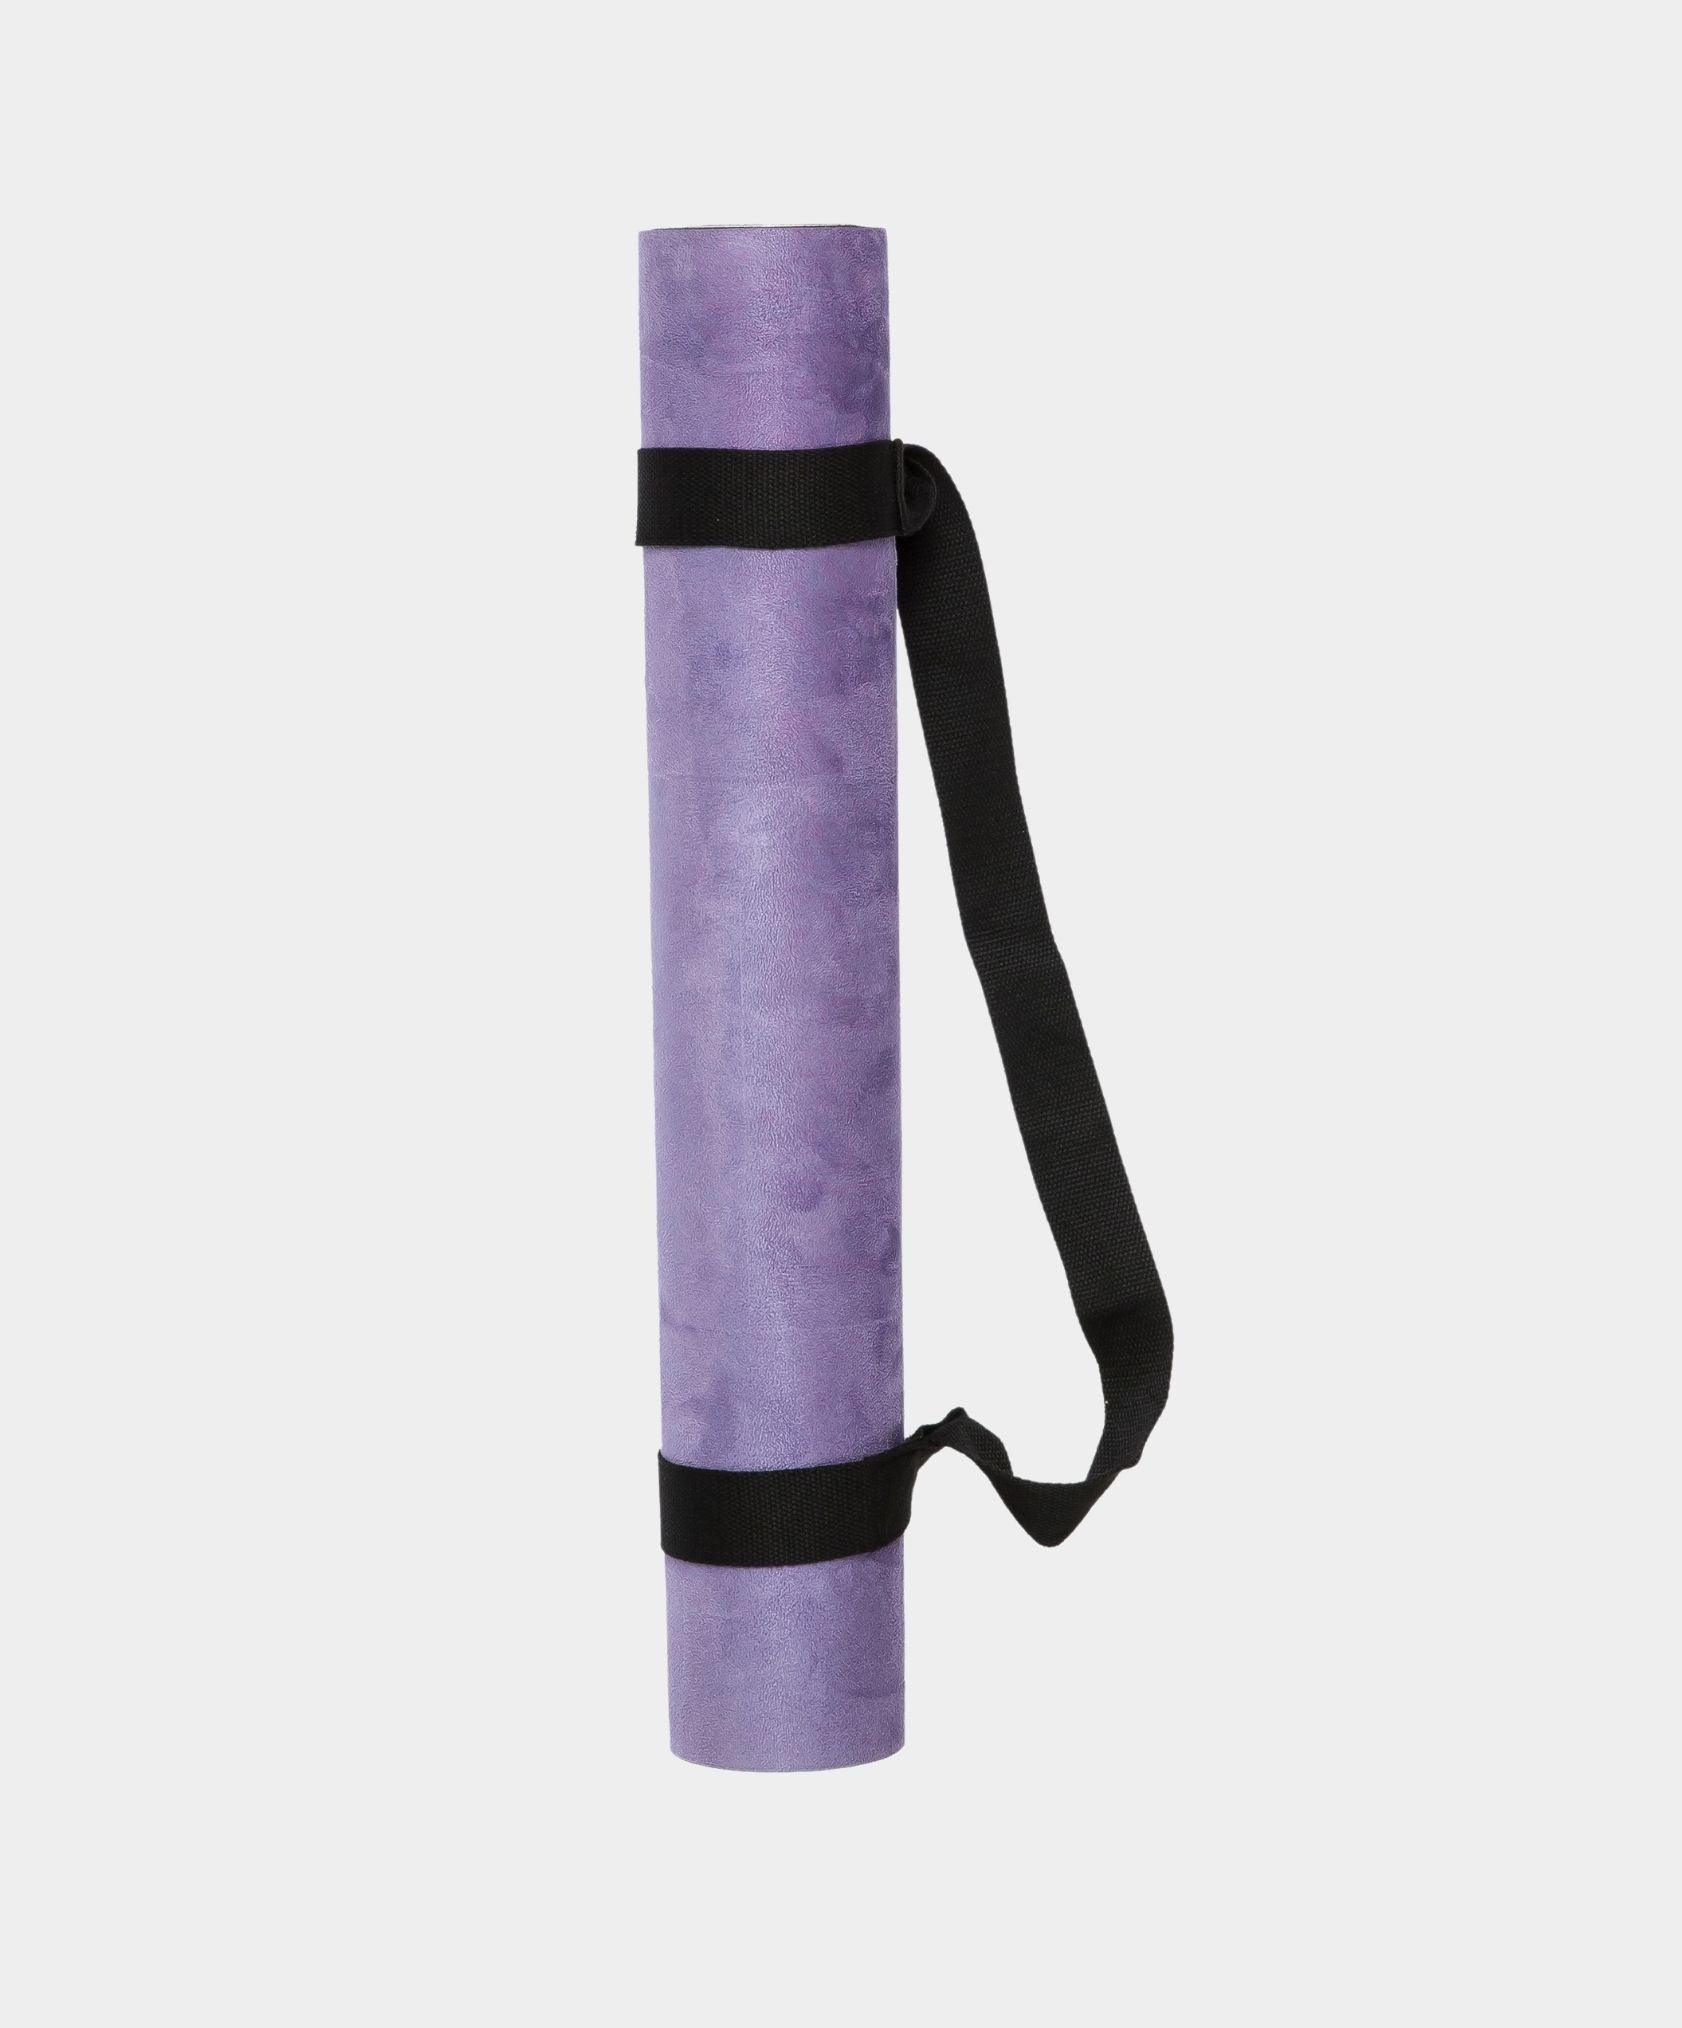 YDL Combo Travel Yoga Mat - 2-in-1 (Mat + Towel) - Best For Travel - Yoga Design Lab 